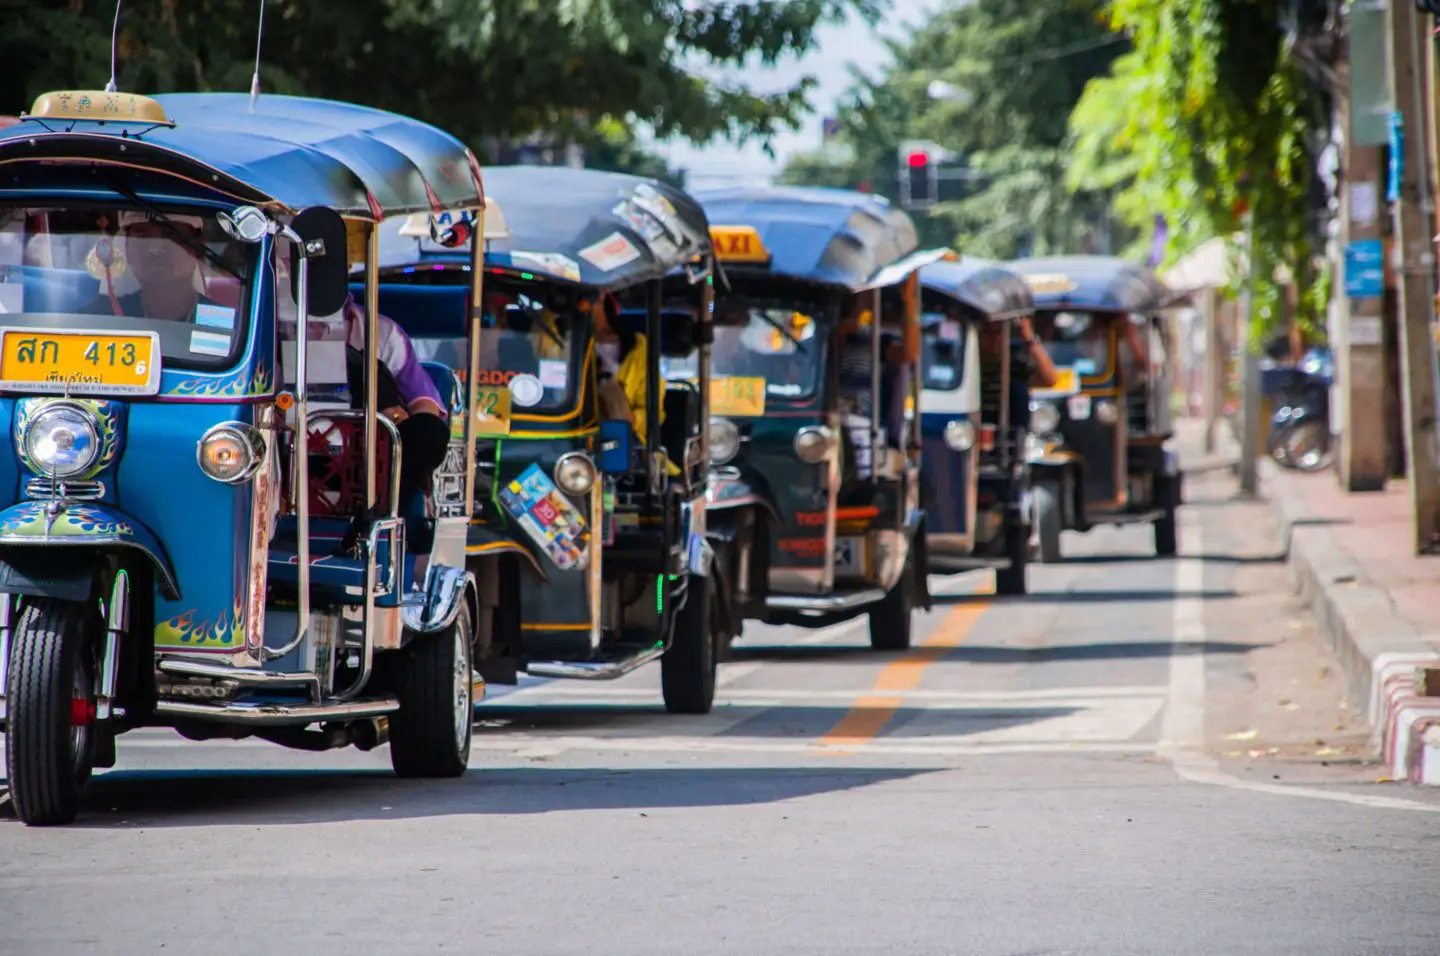 Picture of tuk tuk vehicles in Chiang Mai Thailand